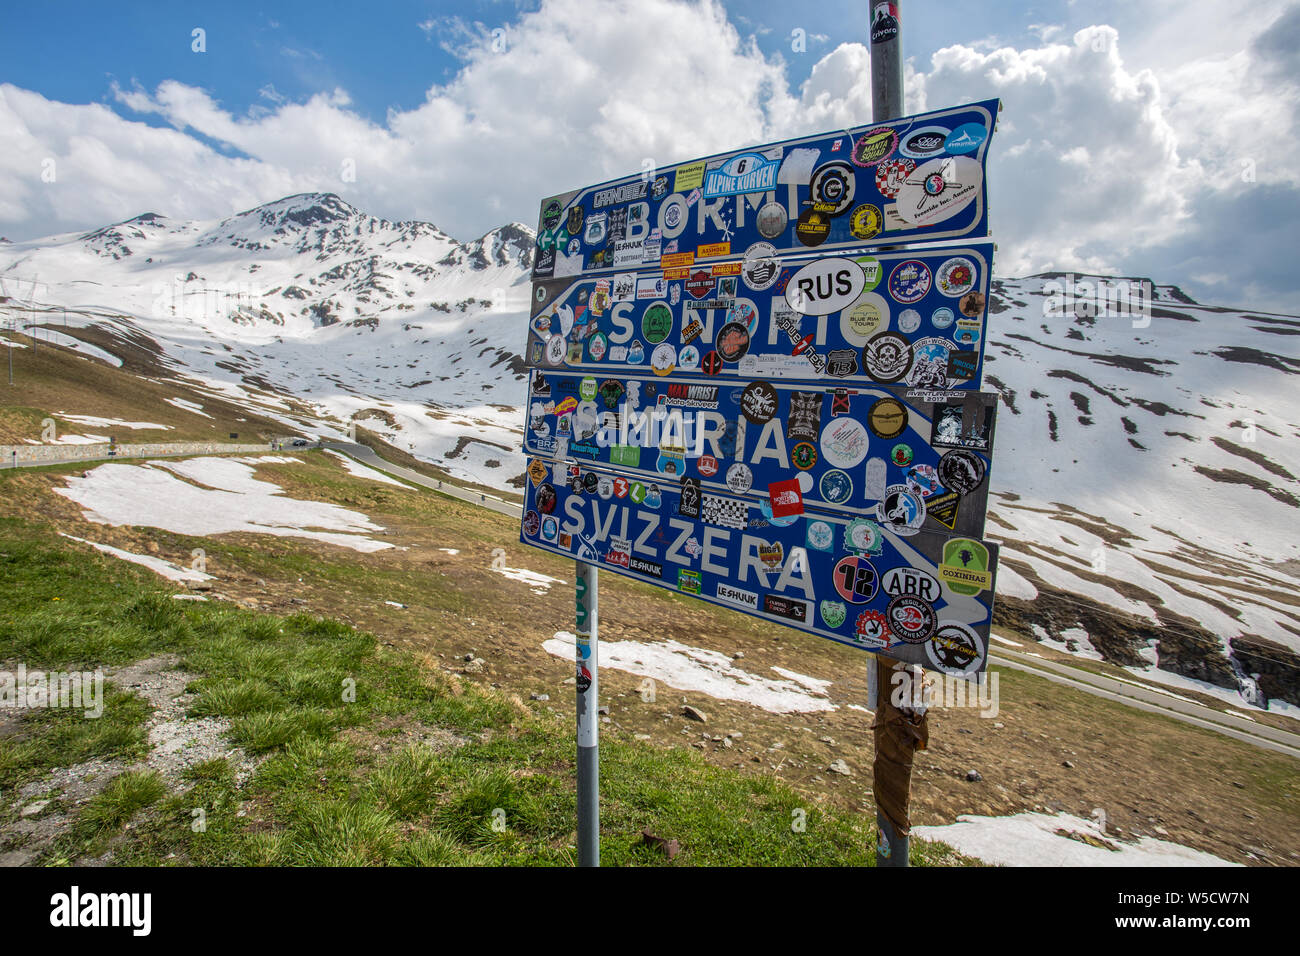 STELVIO PASS, ITALY, JUNE 20, 2019 - Road signs at Stelvio Pass, the highest automobile pass in Italy, 2758 metres, located between Trentino-Alto Adig Stock Photo